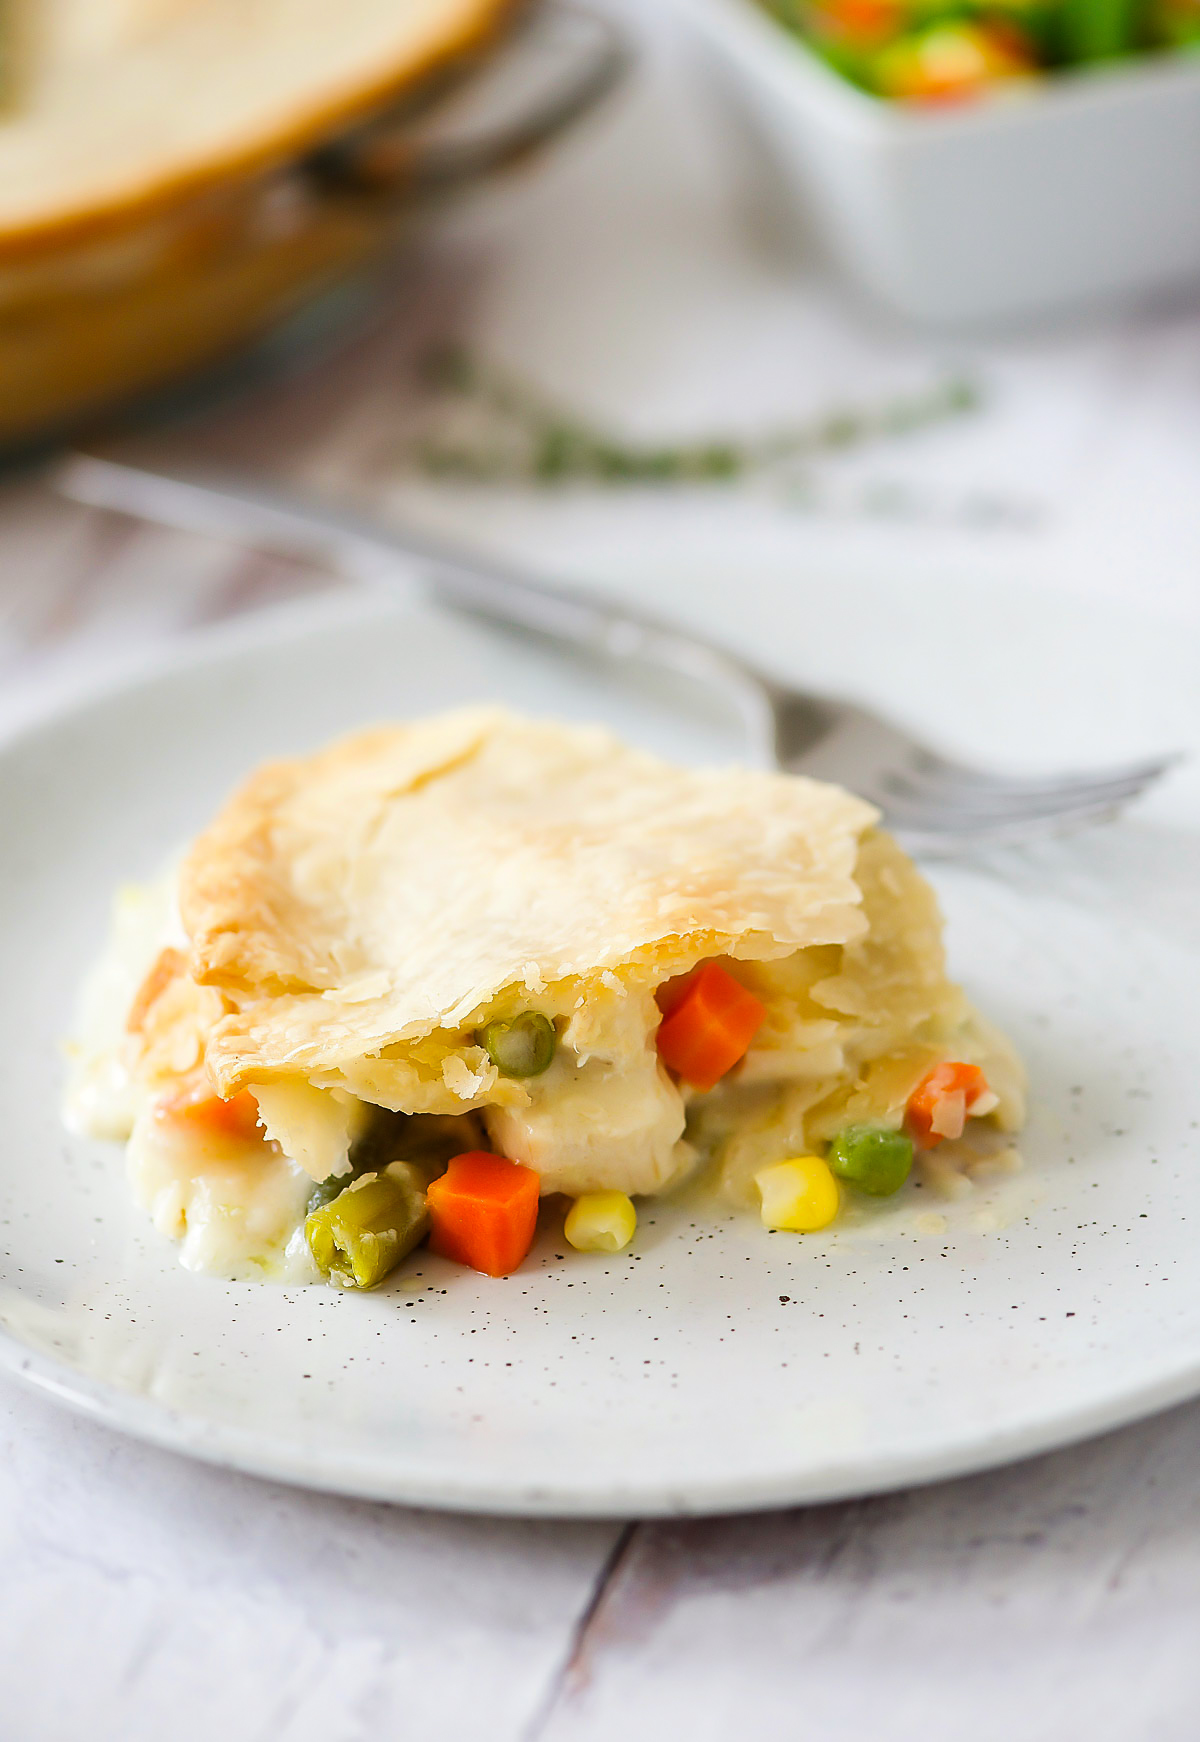 Chicken Pot Pie is a delicious savory pie filled with a chicken and vegetable filling inside a flaky pie crust. Life-in-the-Lofthouse.com